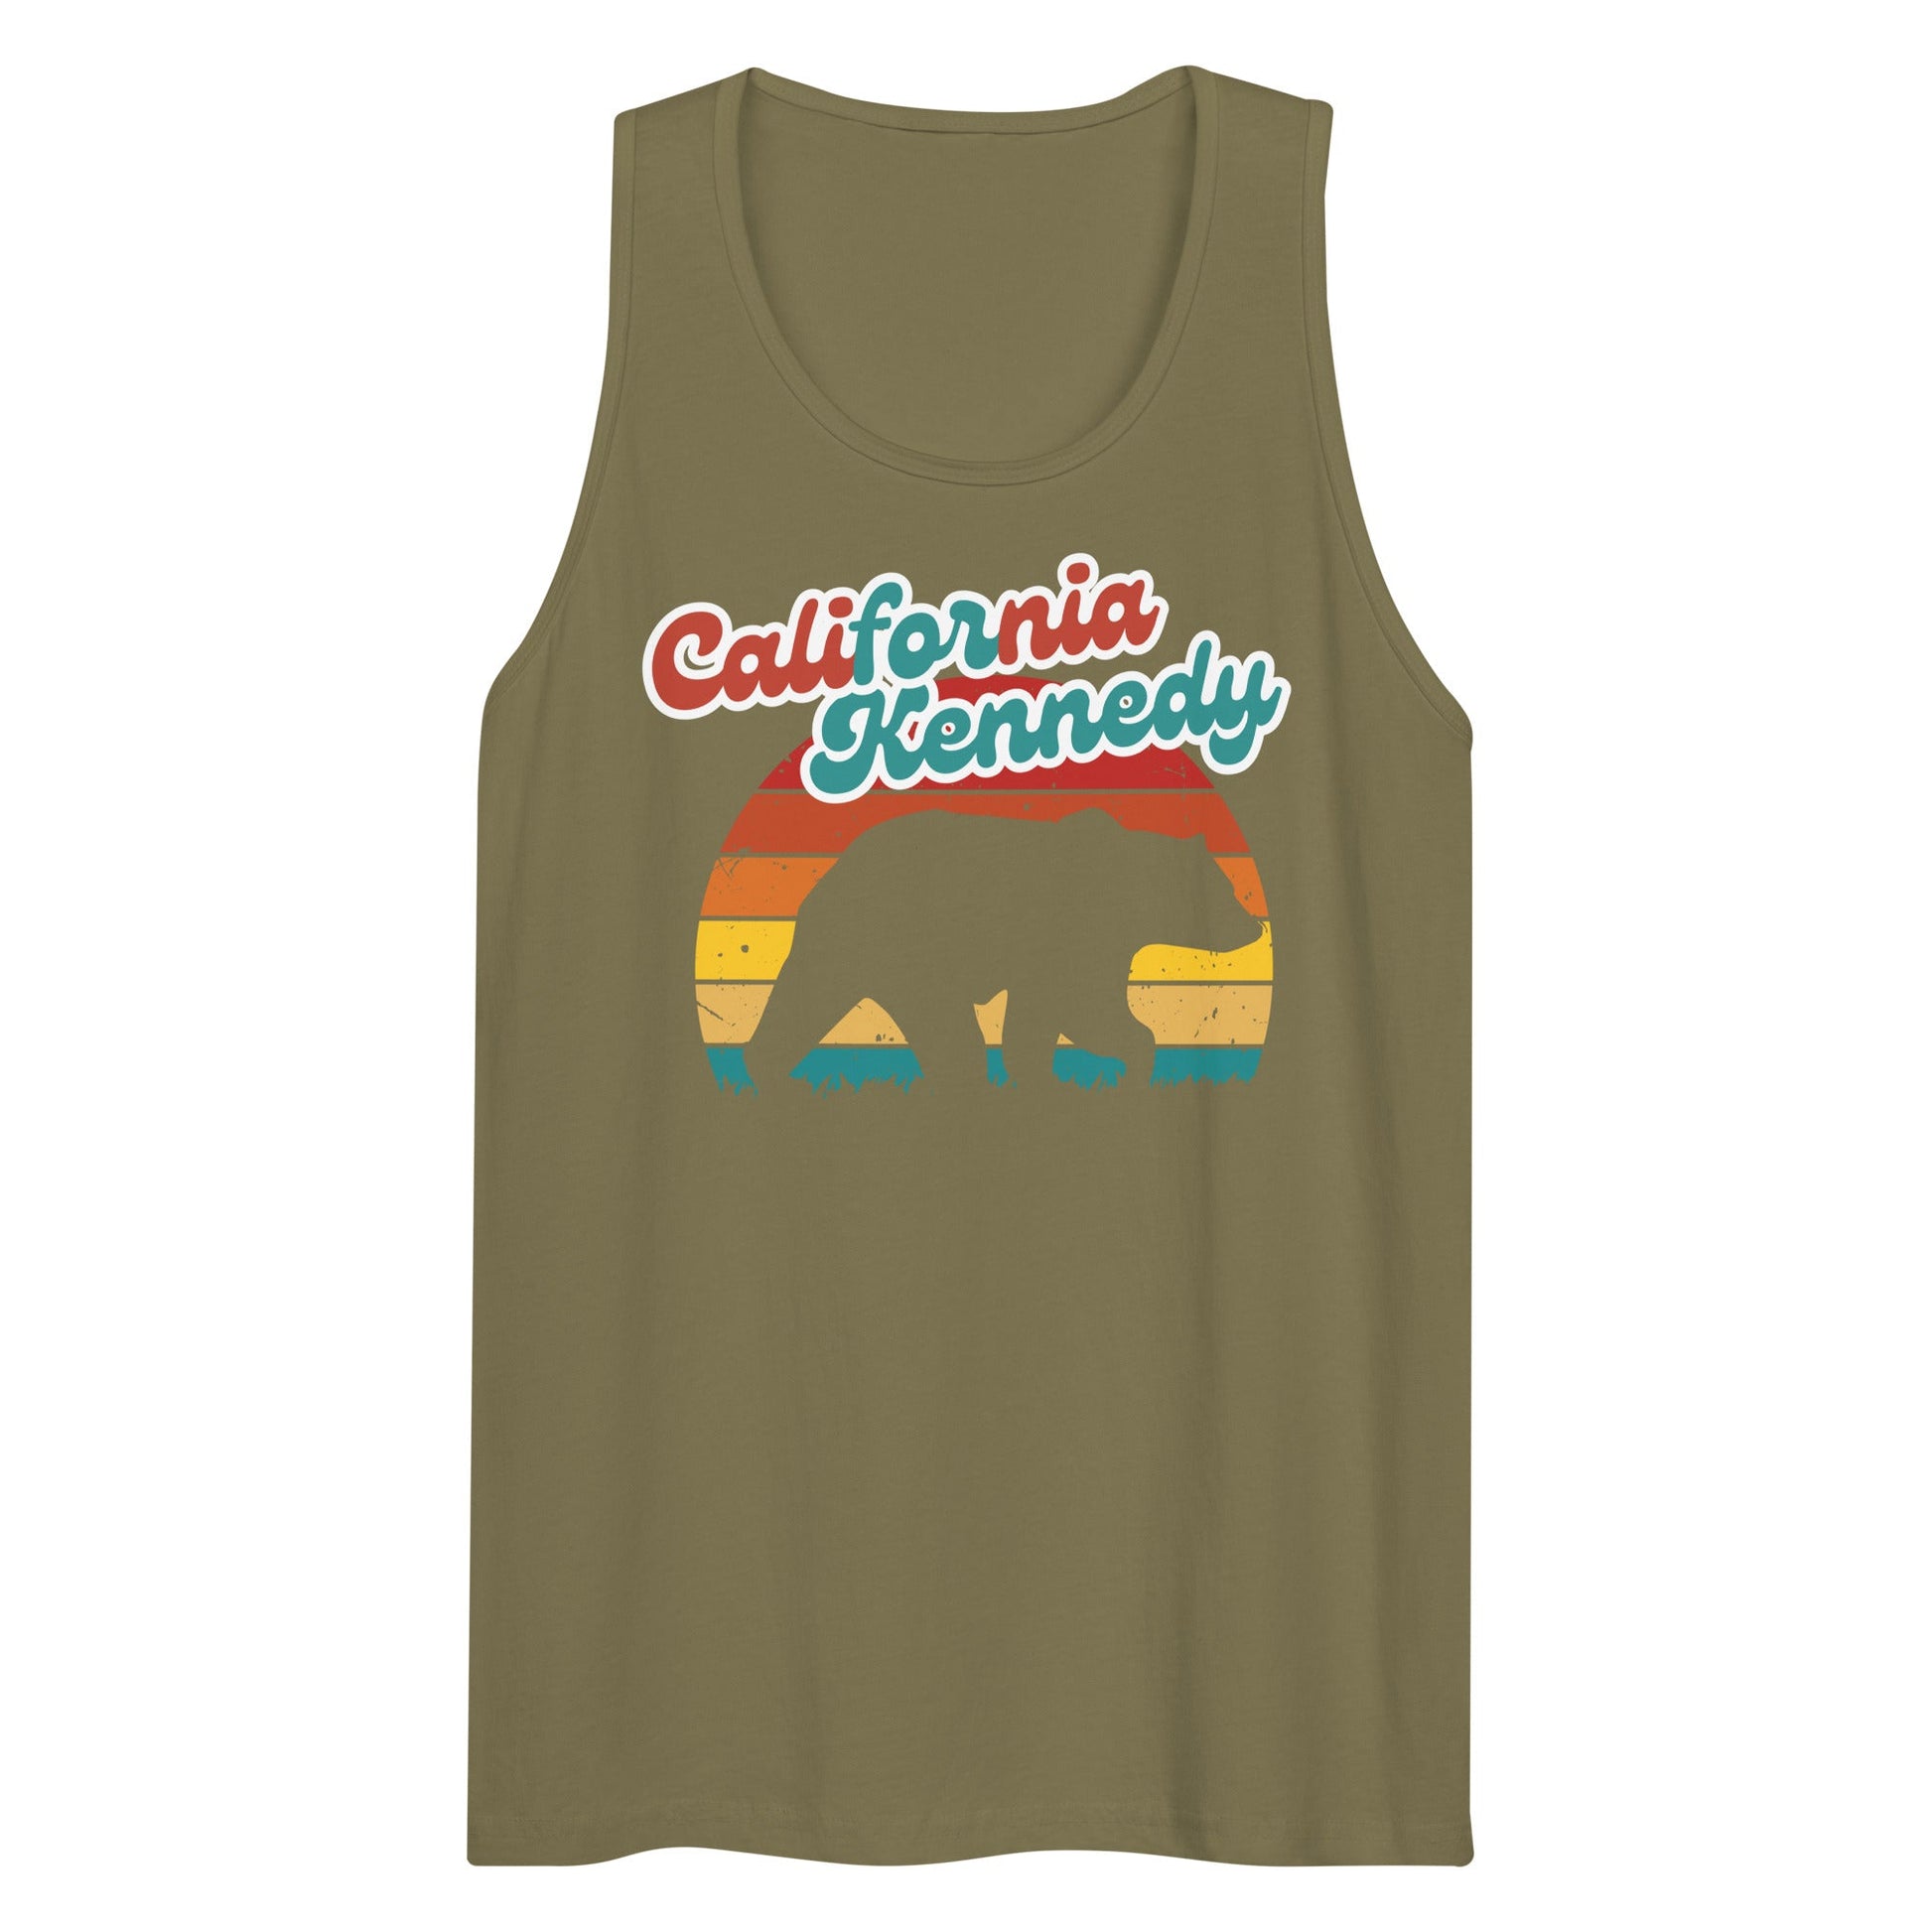 California for Kennedy Bear Men’s Tank Top - TEAM KENNEDY. All rights reserved